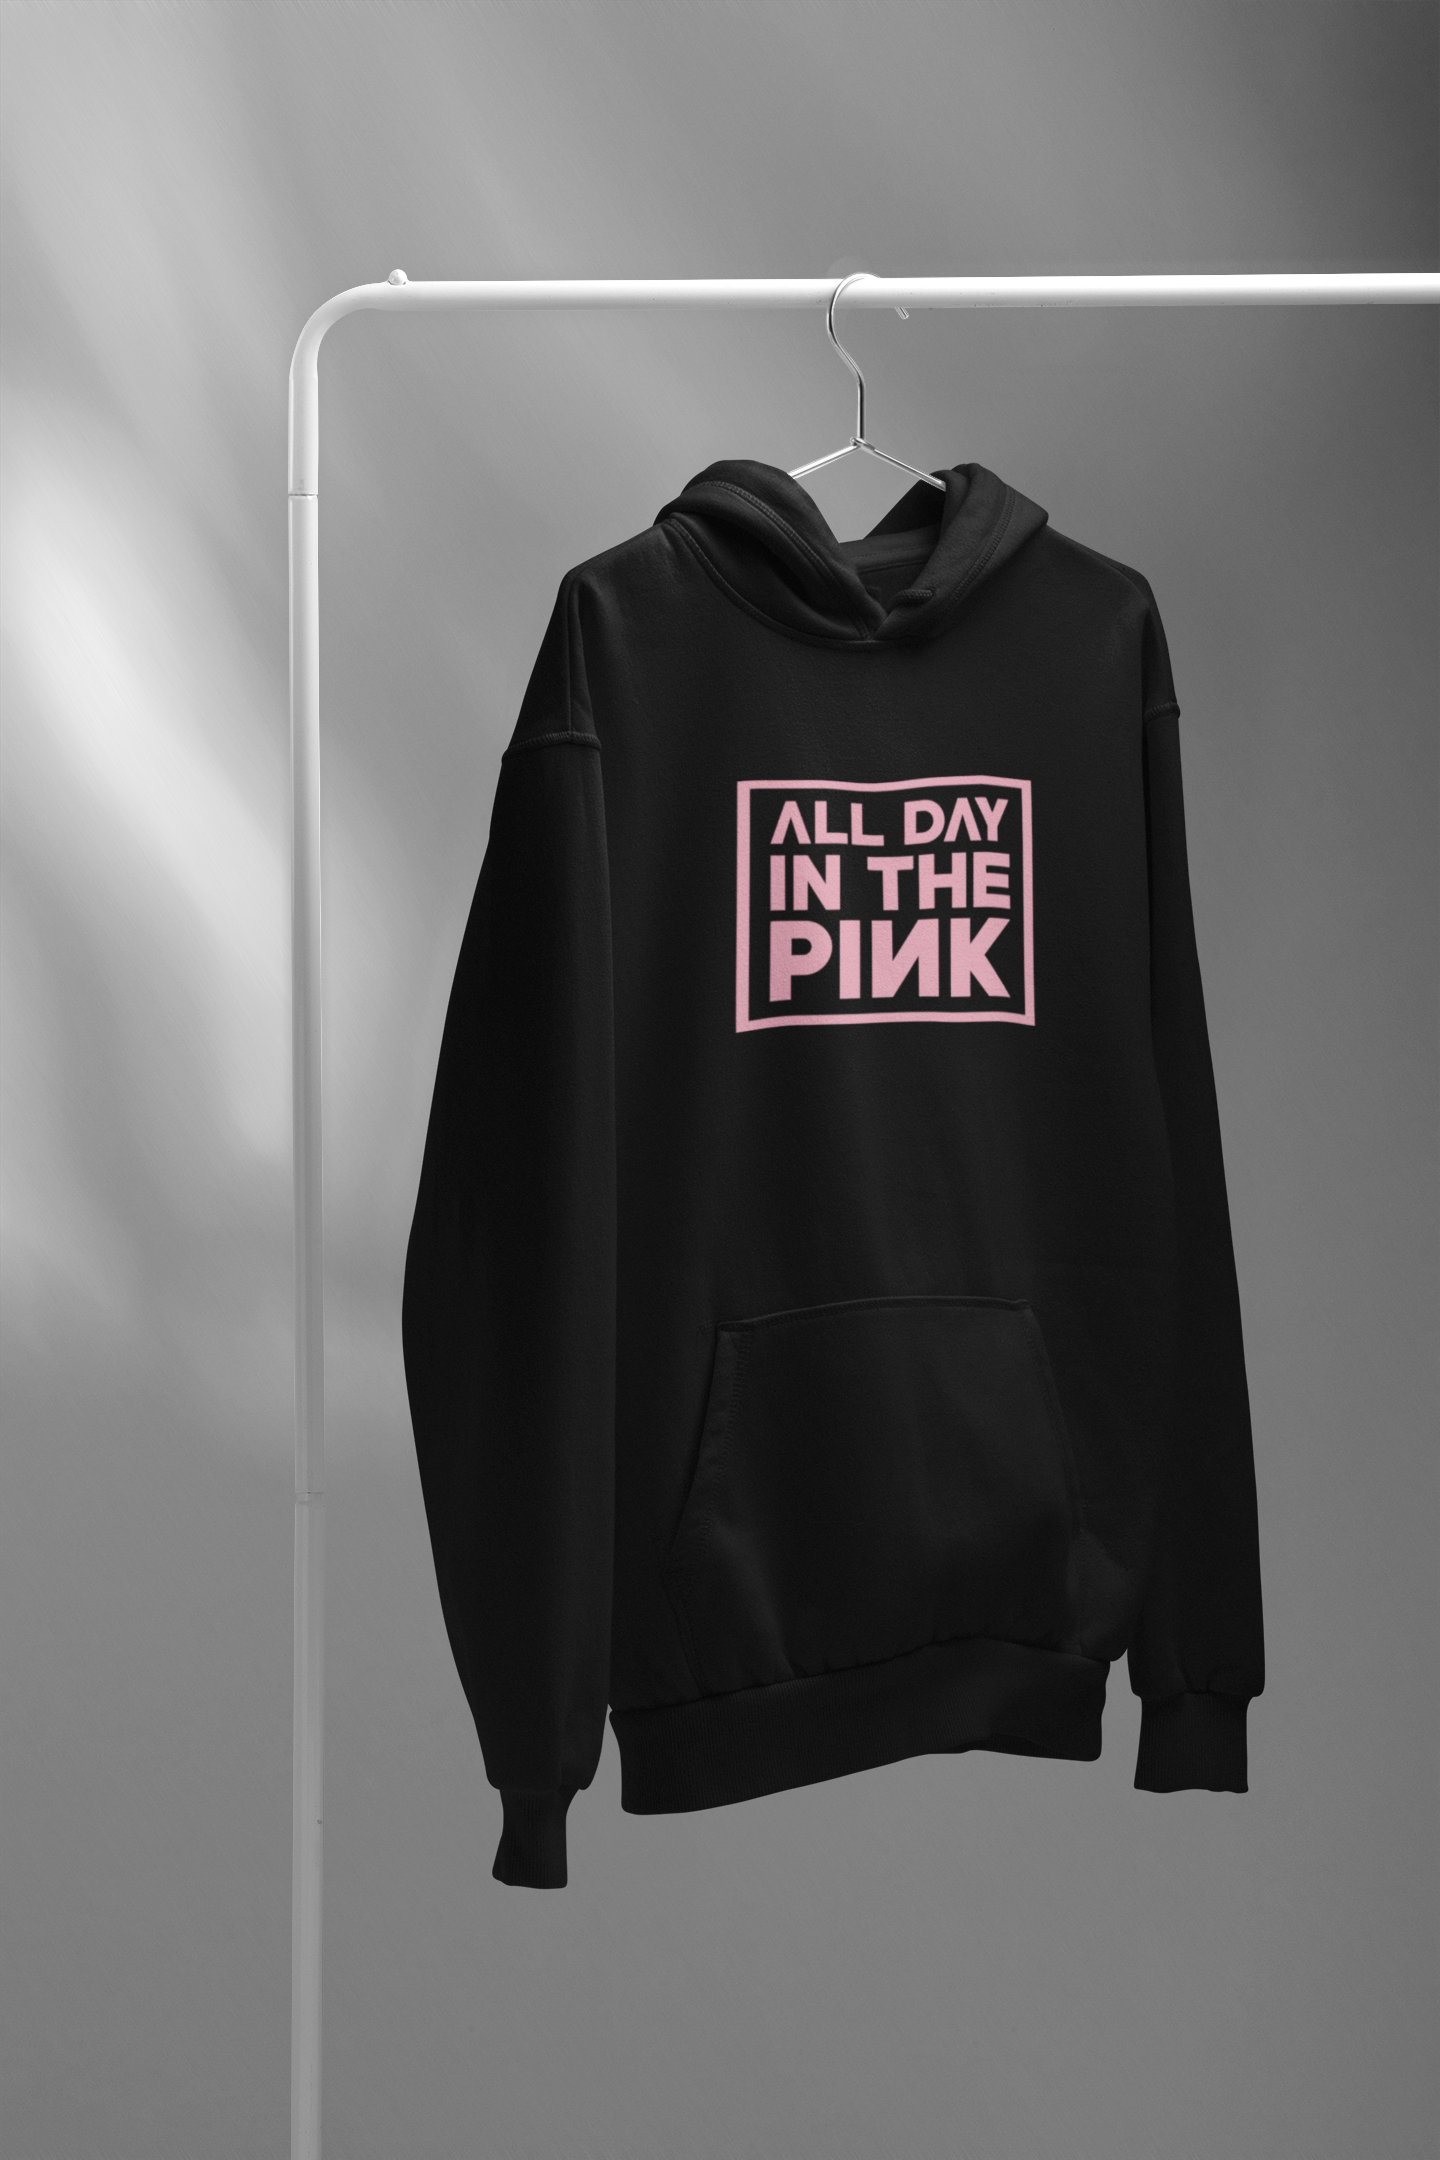 All Day in the Pink: BLACKPINK - WINTER HOODIES